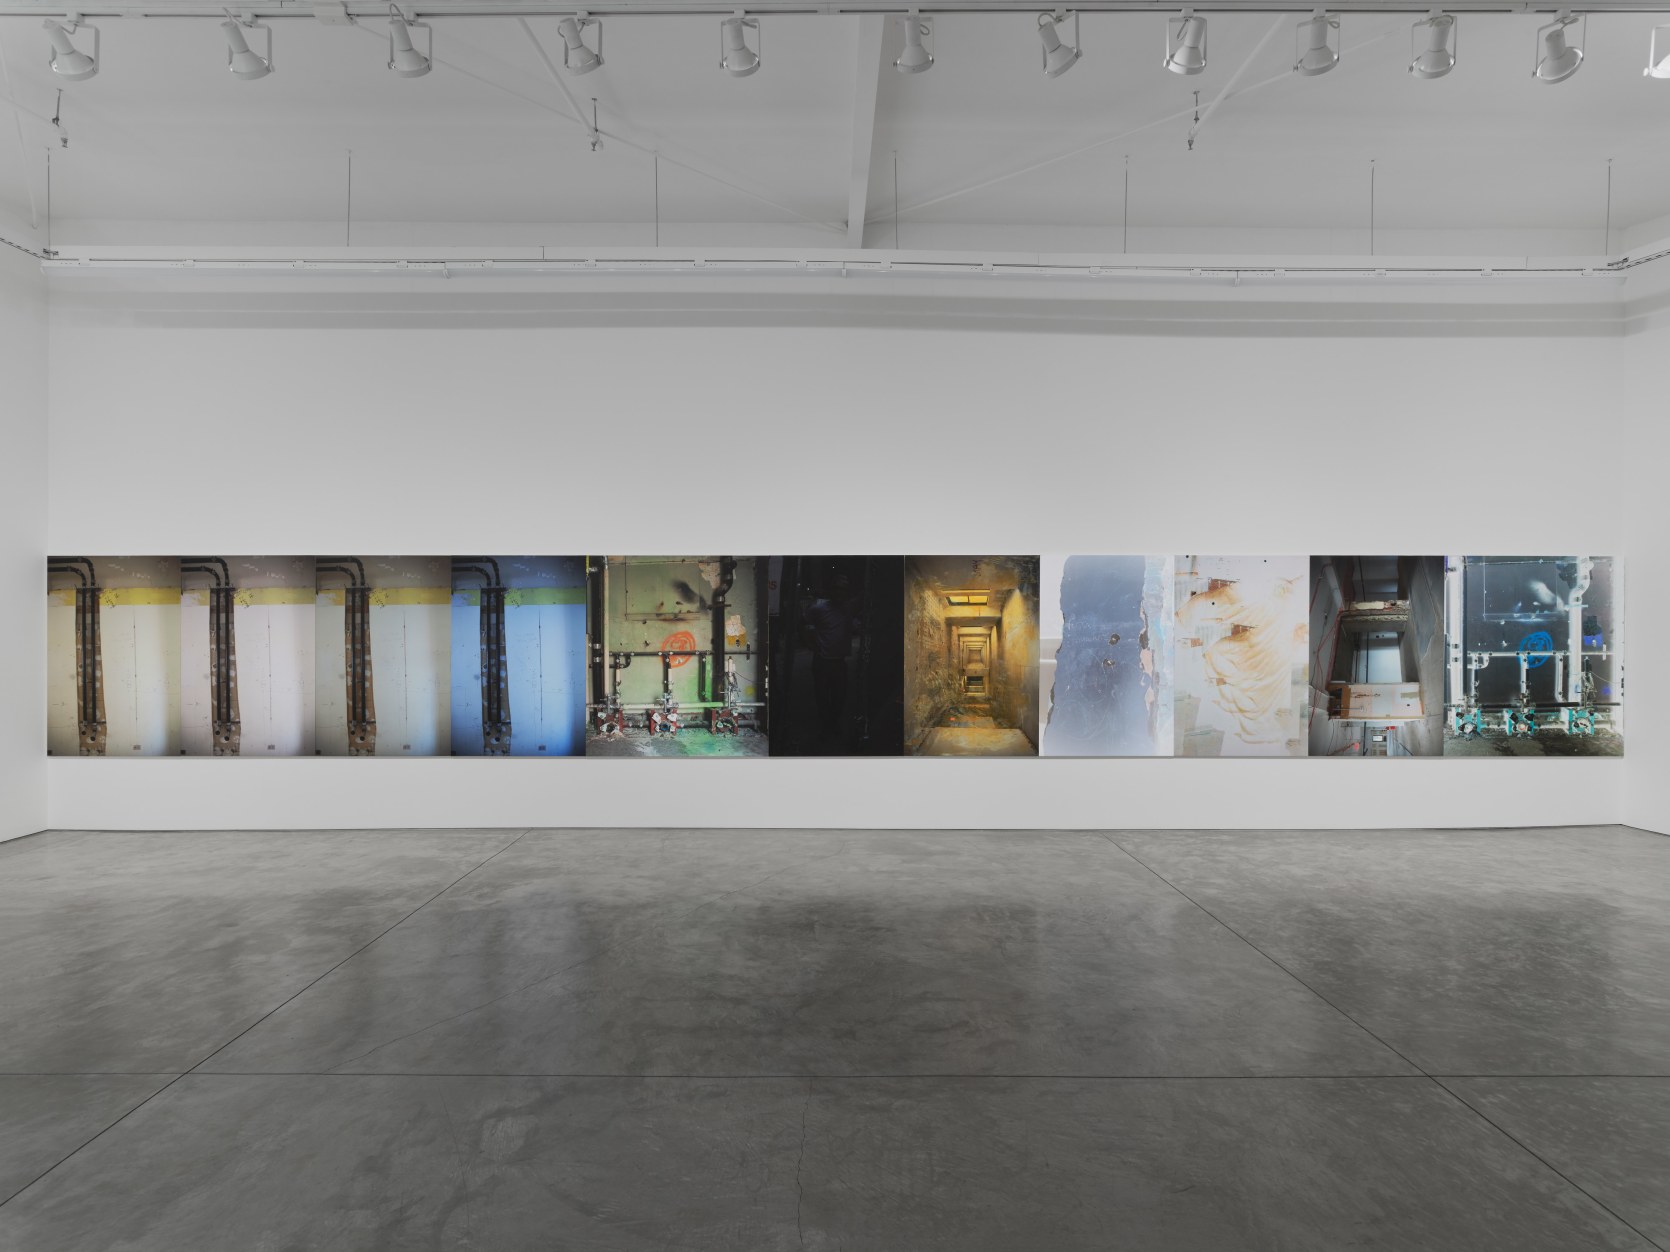 Installation view of Rose Marcus' "Repro" at Night Gallery, Los Angeles